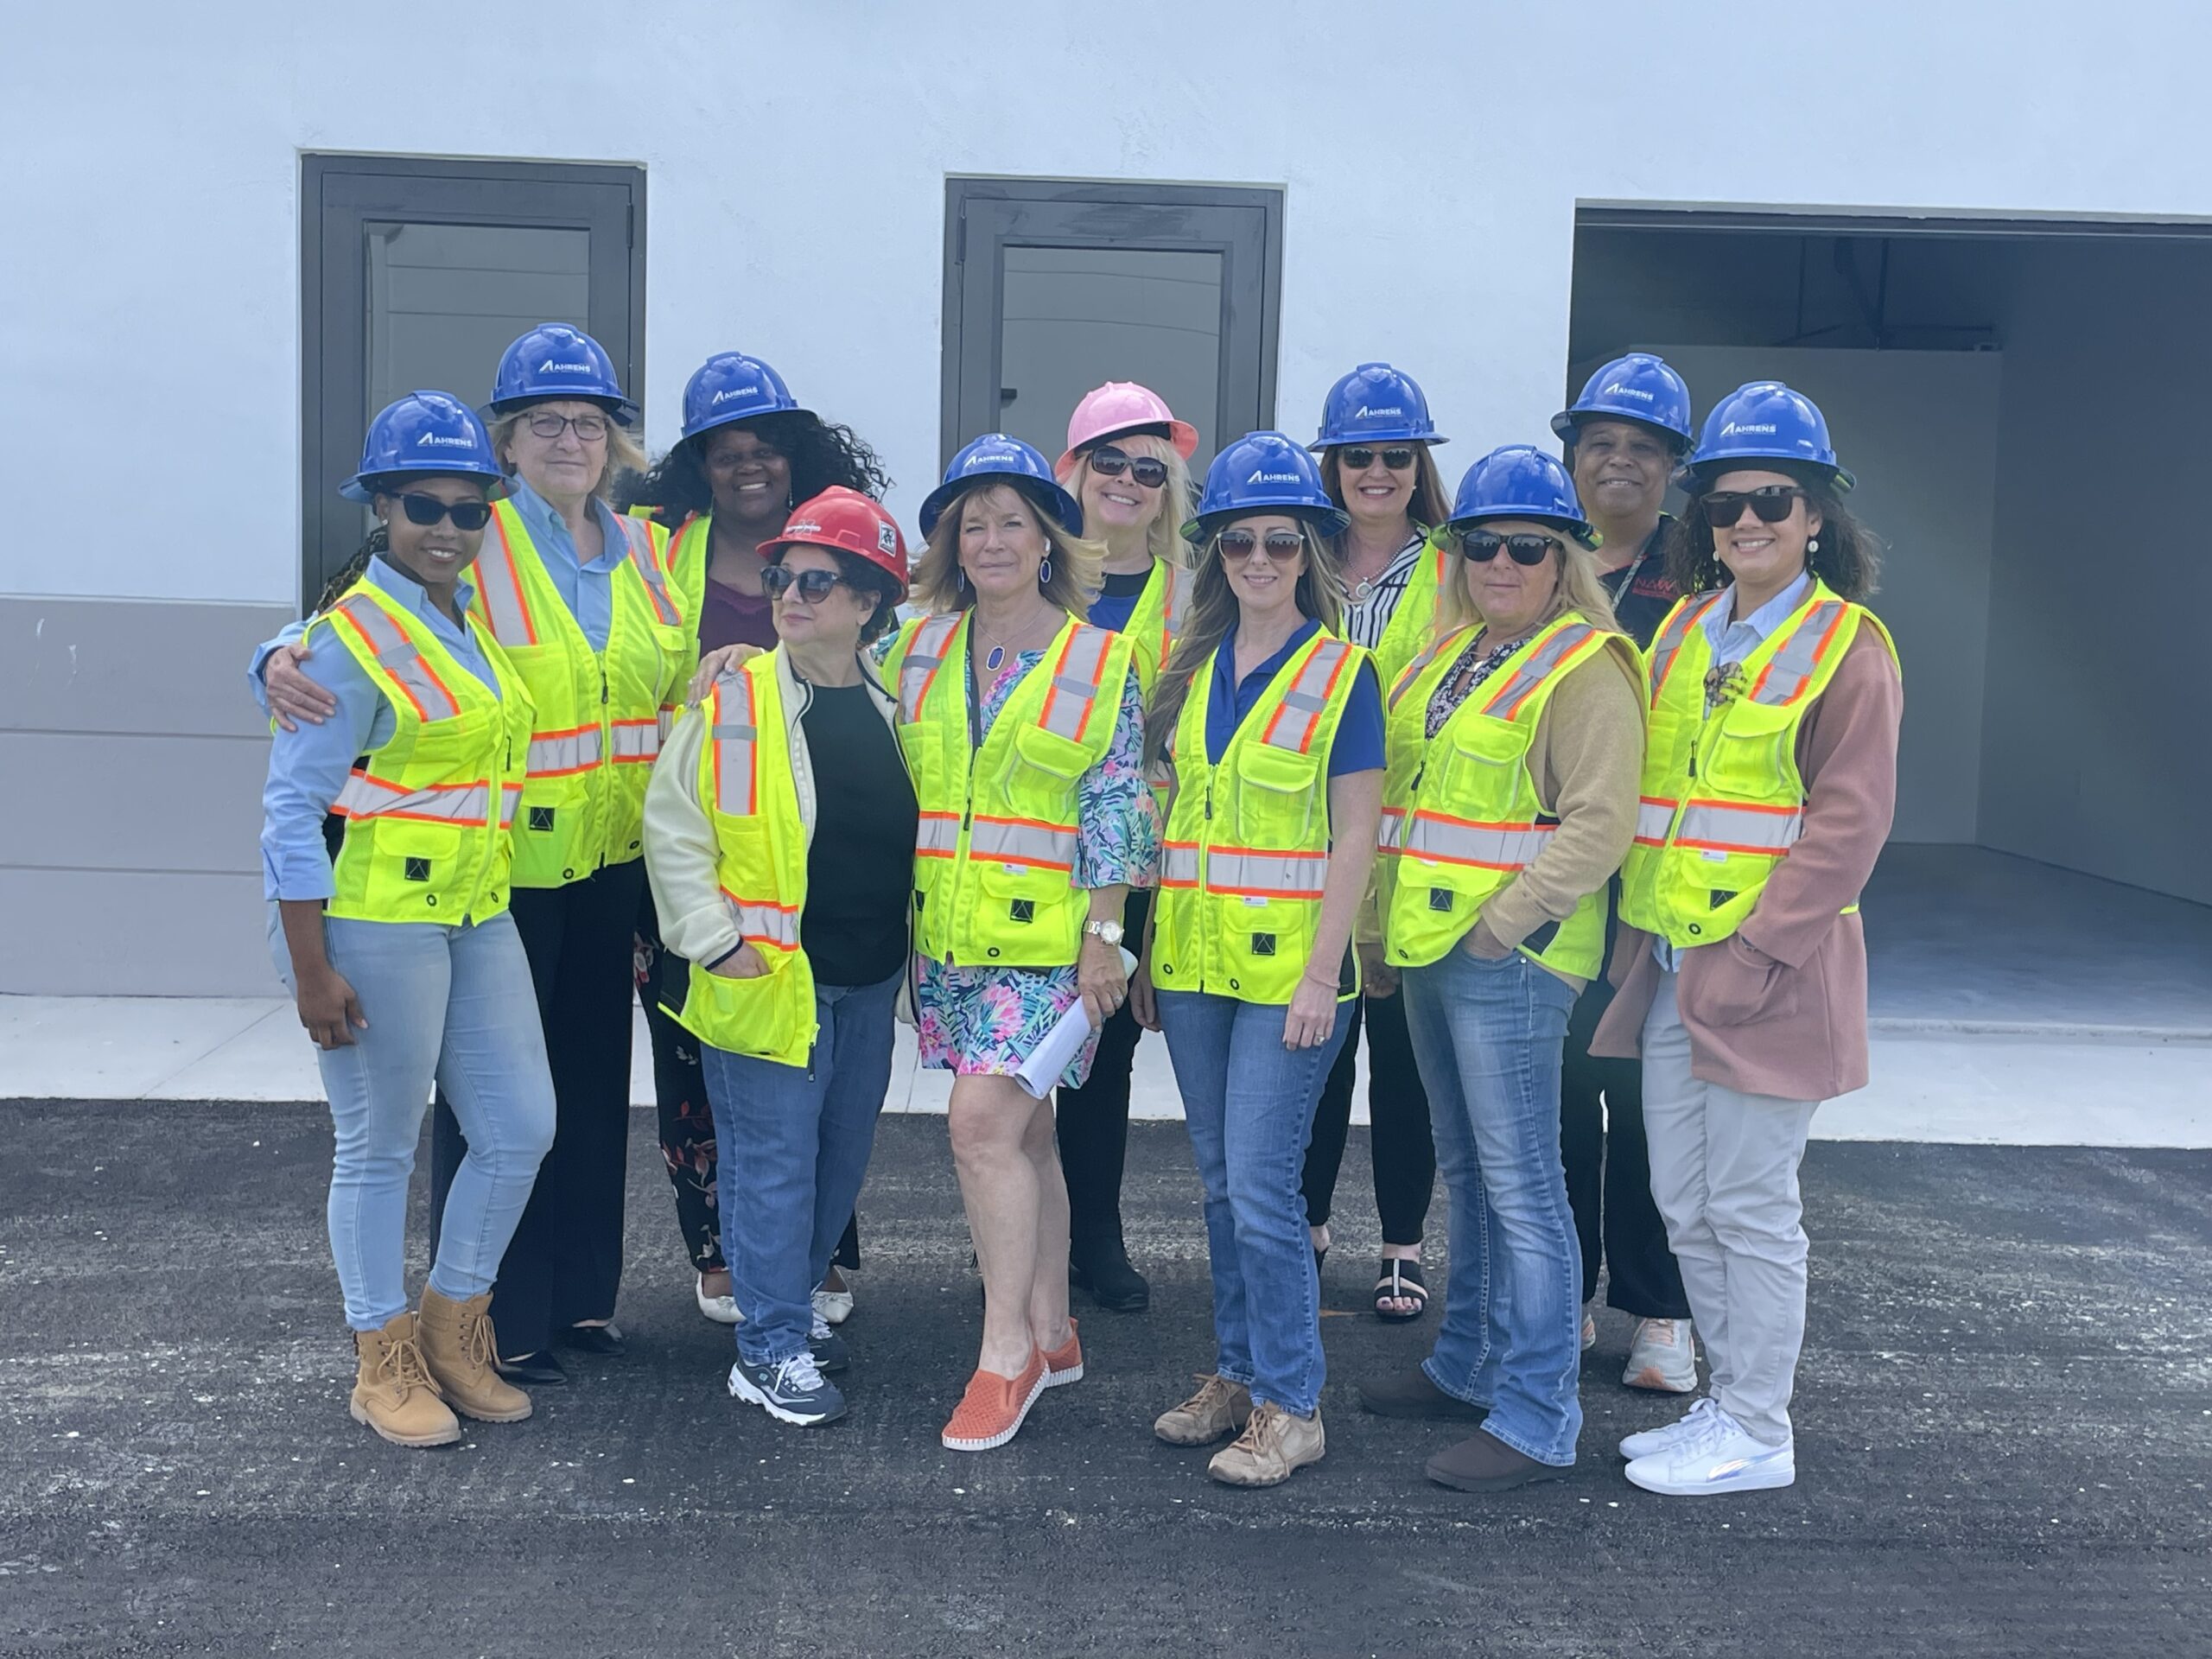 Celebrating Women’s Contribution in the Construction Industry: Ahrens Companies and NAWIC